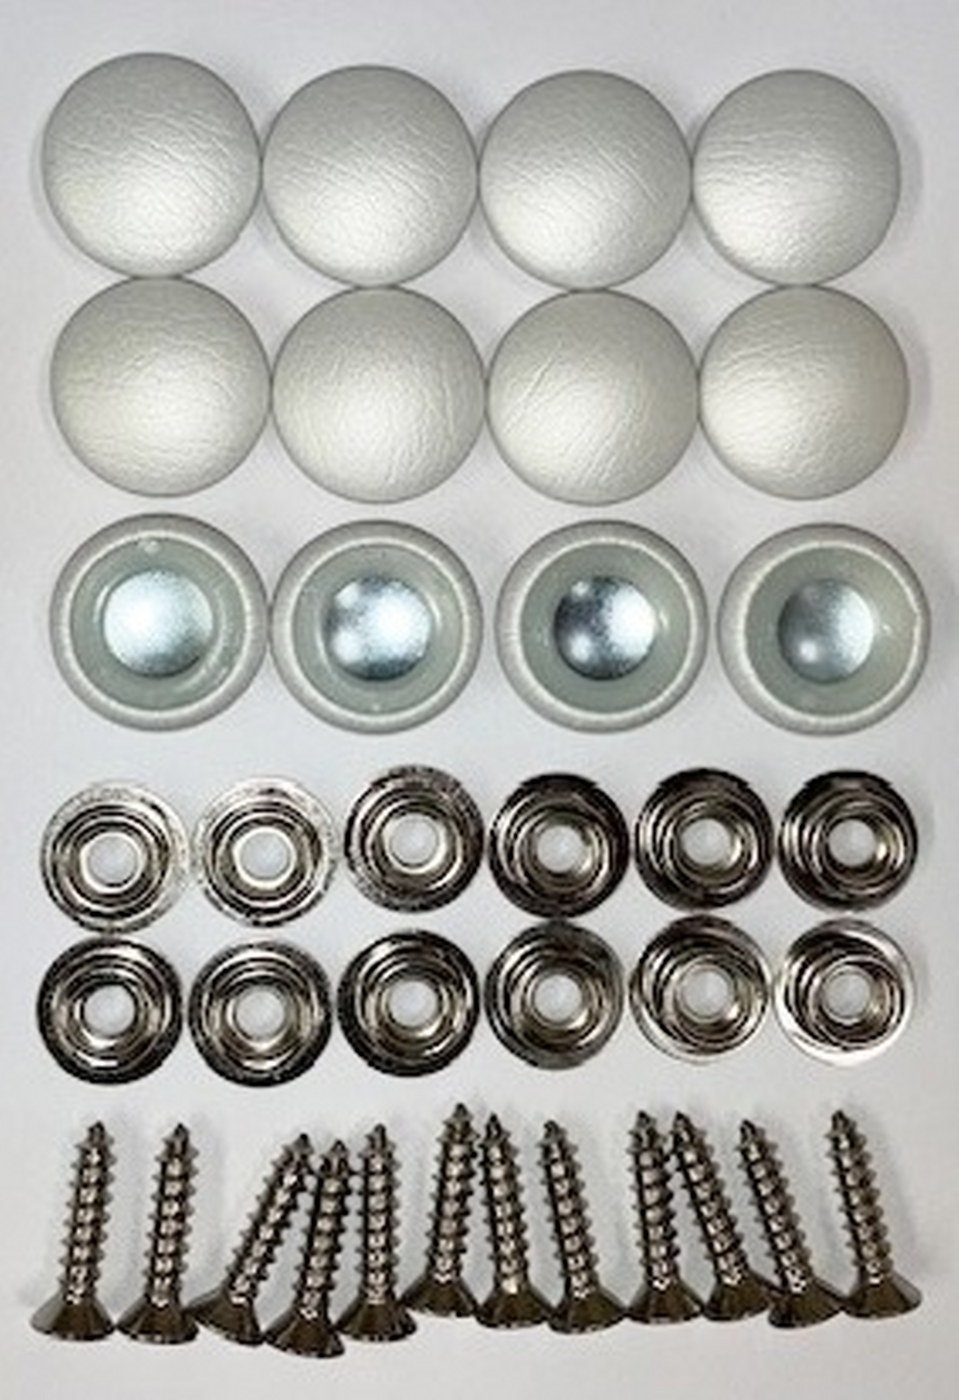 Vstar Products Set Of 12 Dura Snap Upholstery Buttons #30 Metallic